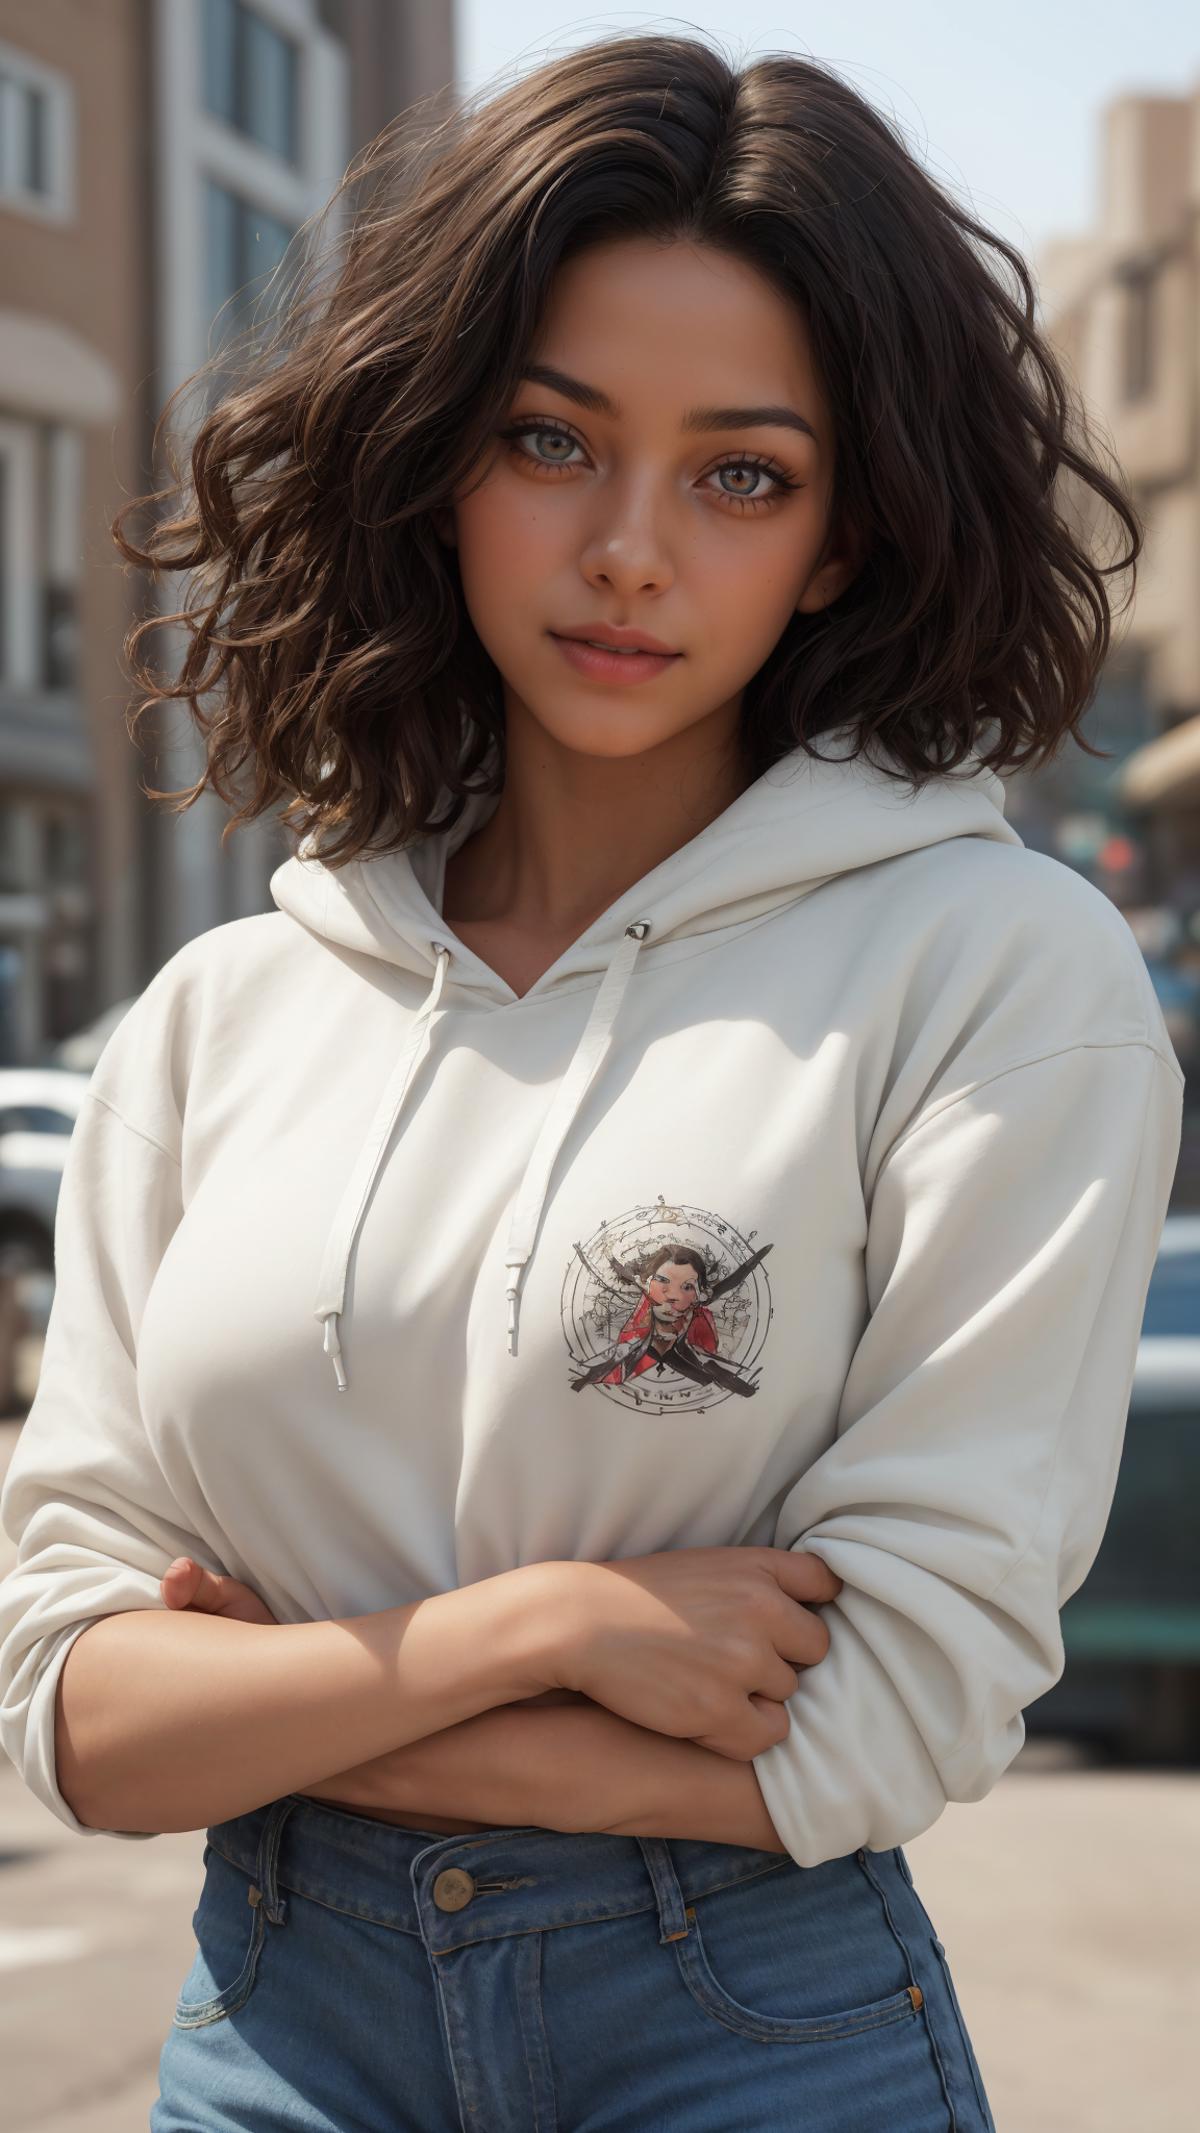 A woman wearing a white hoodie with a design on the front.